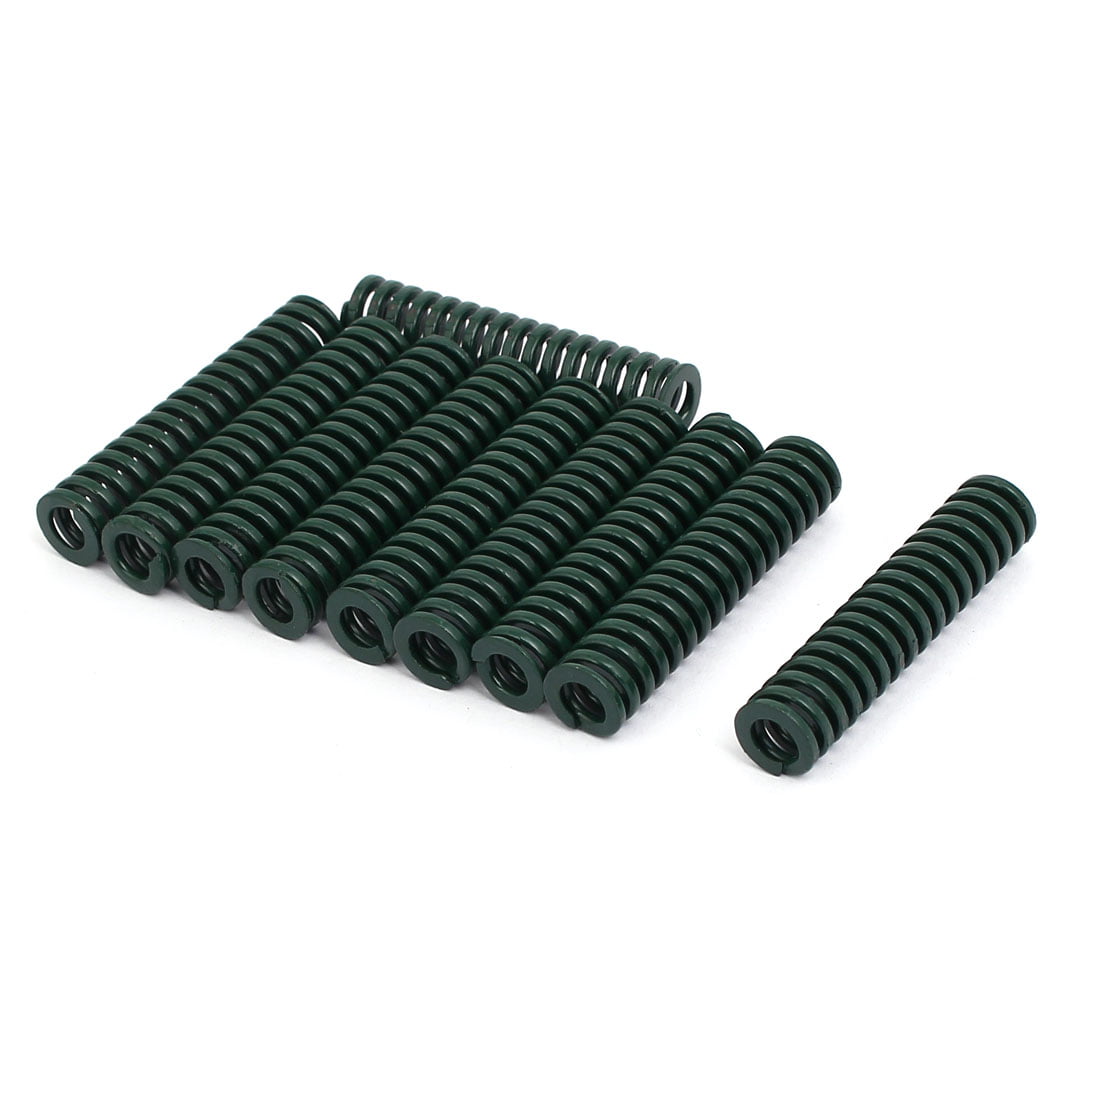 10mm OD 45mm Free Length Heavy Load Compression Mould Die Spring Green 5pcs 